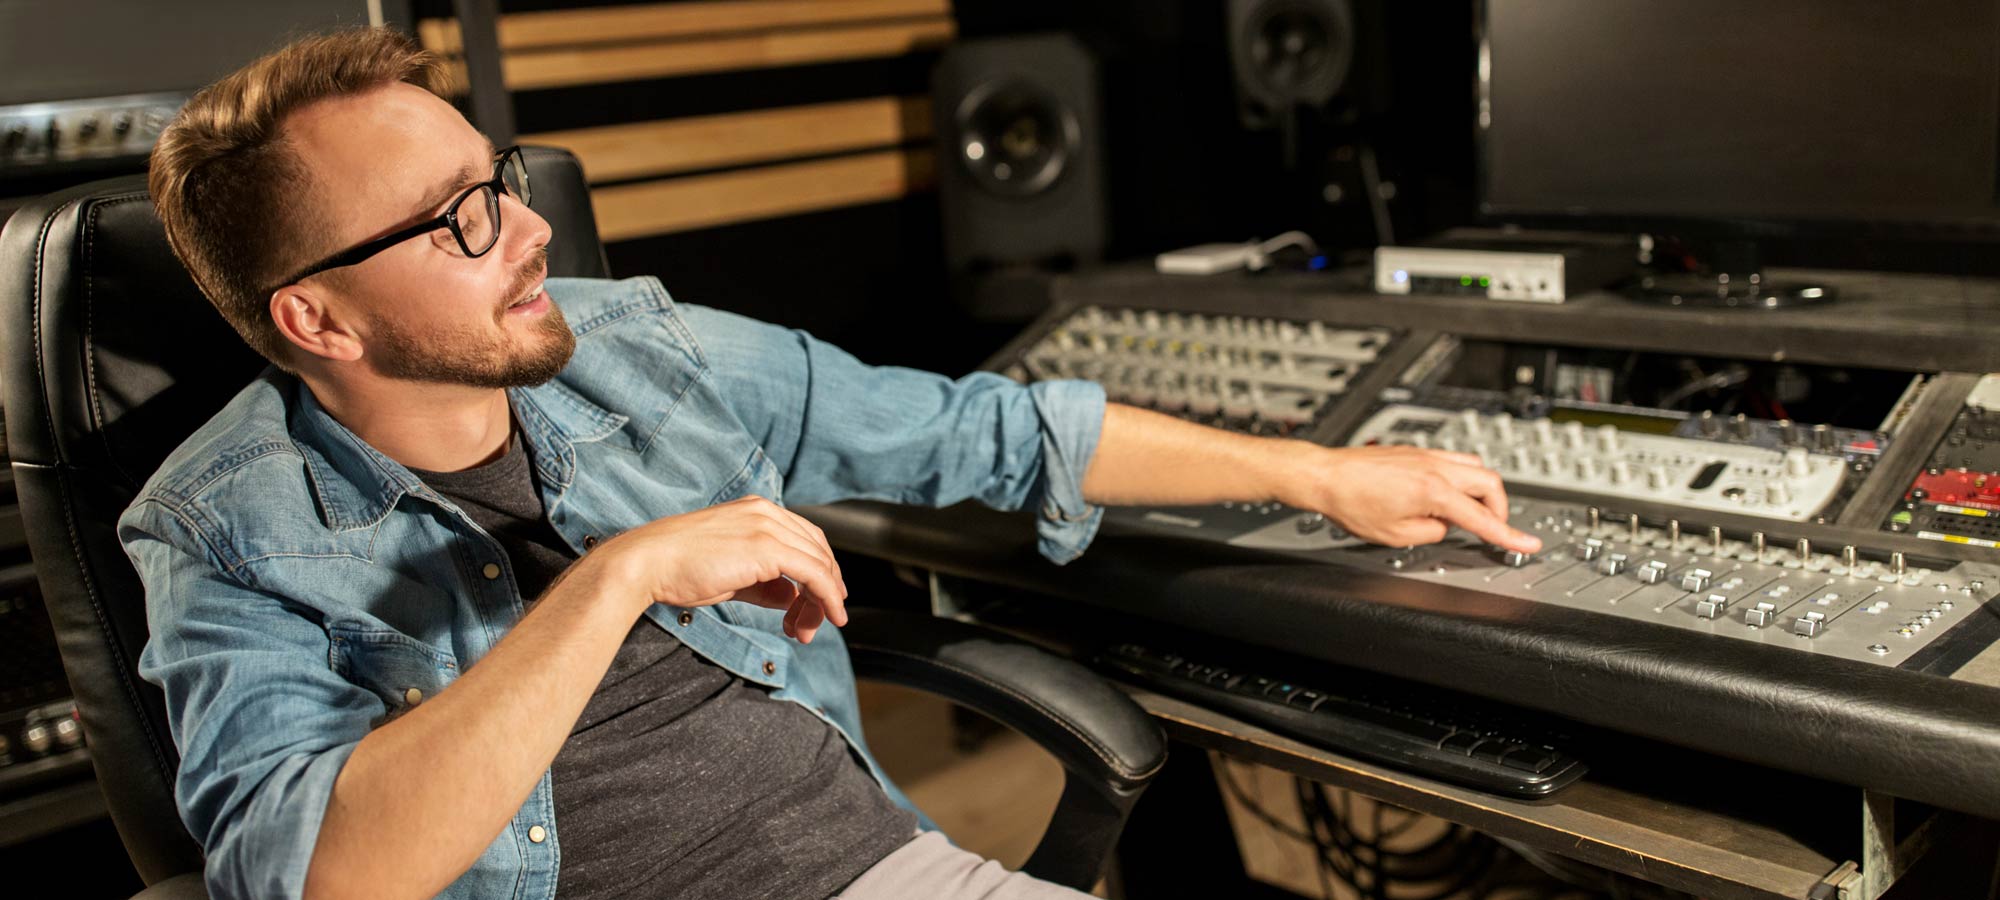 to invent sew perspective 8 Careers in Music Production You Should Know About